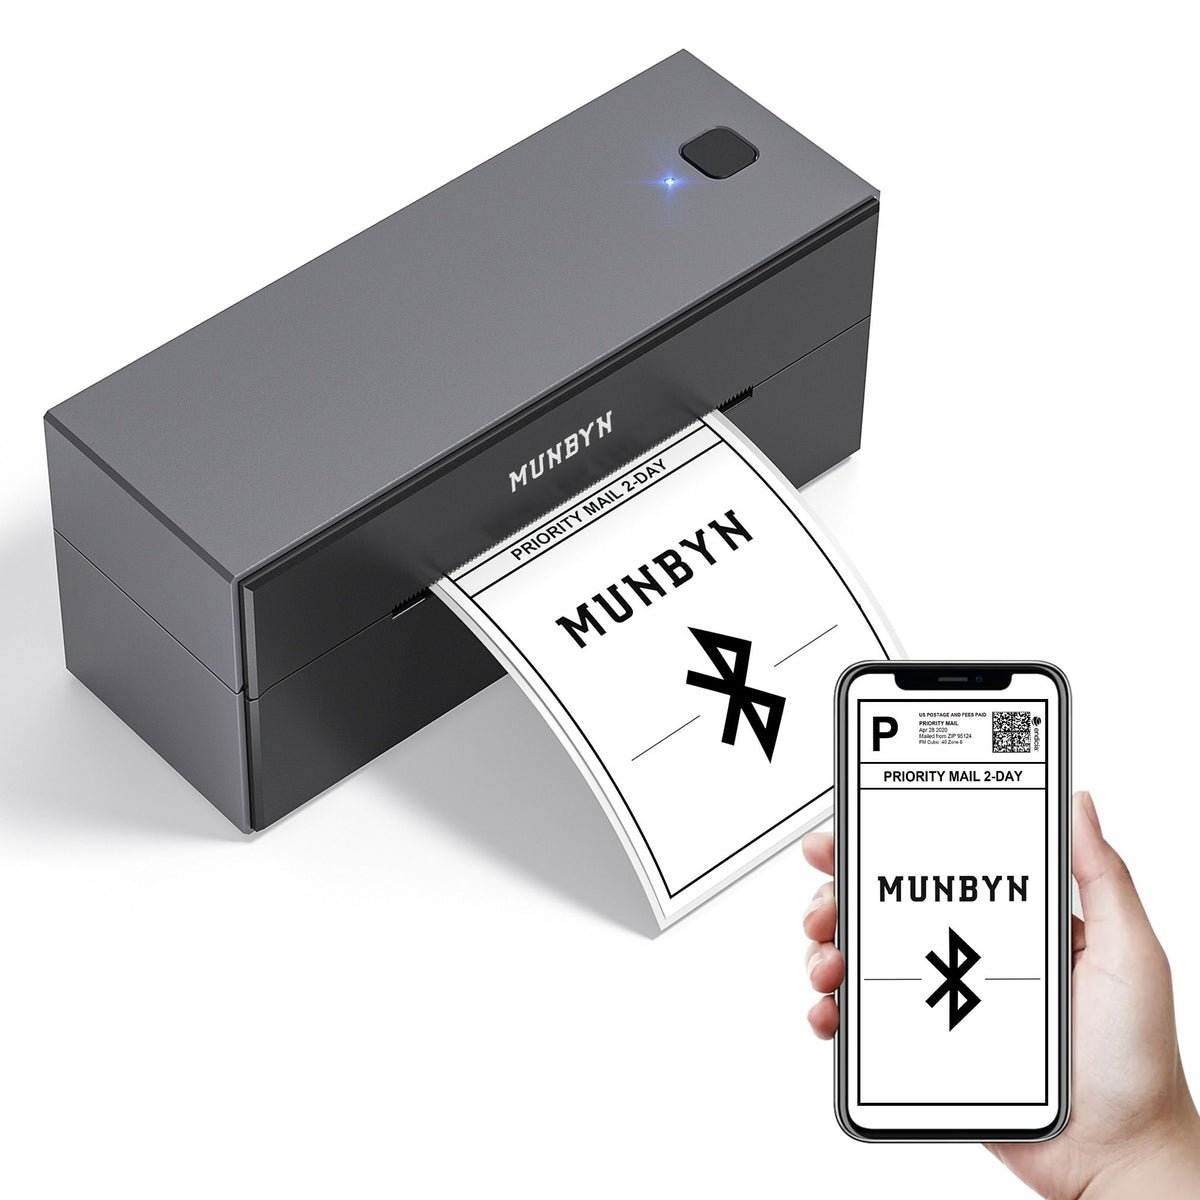 Munbyn P129 Bluetooth label printer supports various label sizes, accommodating different needs.